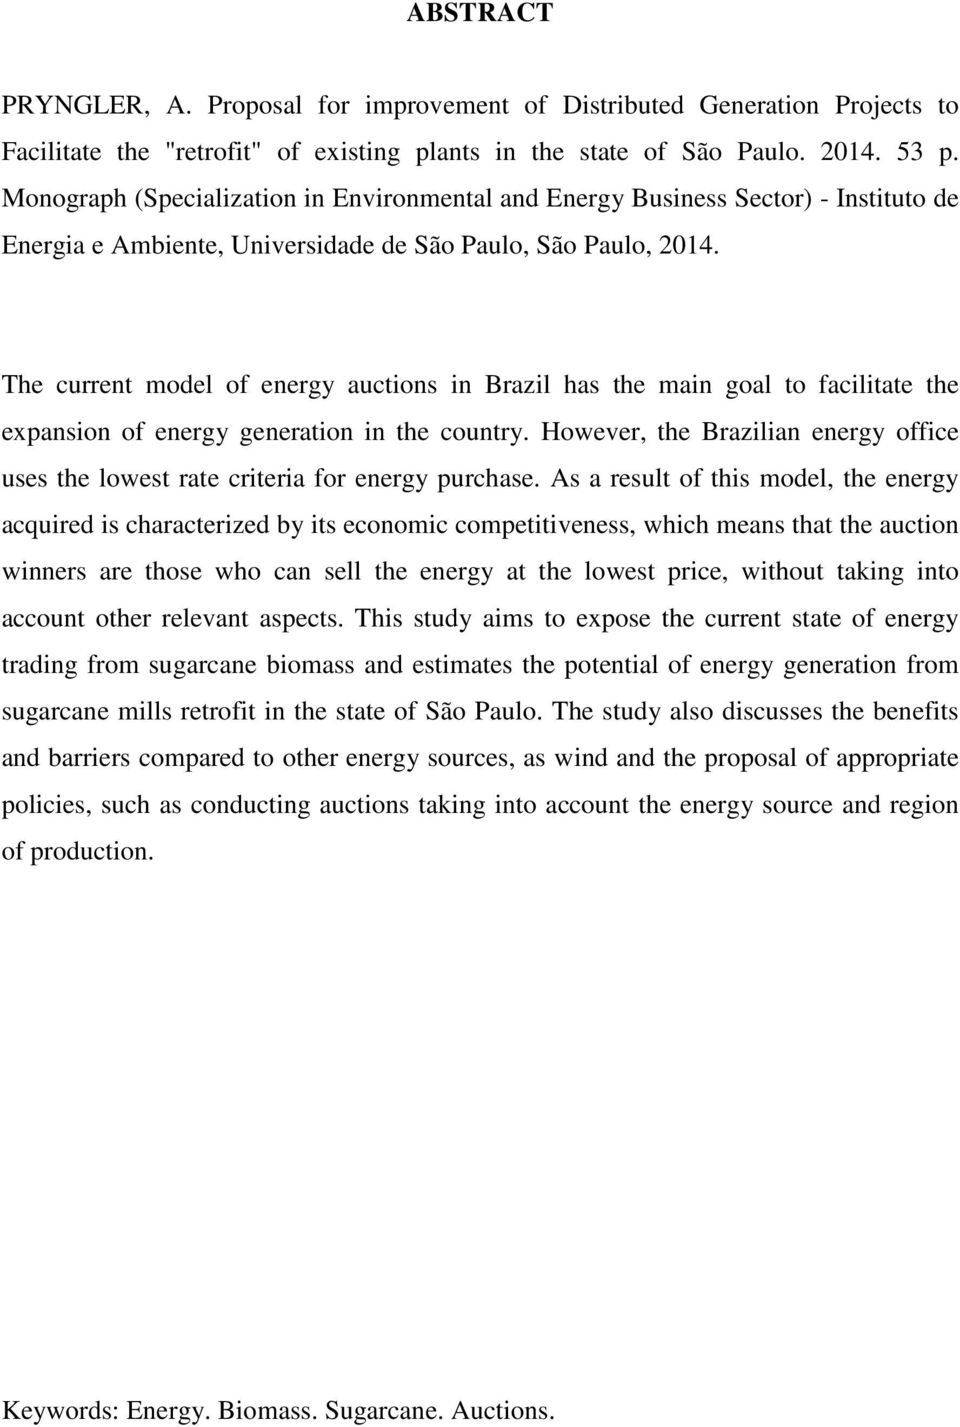 The current model of energy auctions in Brazil has the main goal to facilitate the expansion of energy generation in the country.